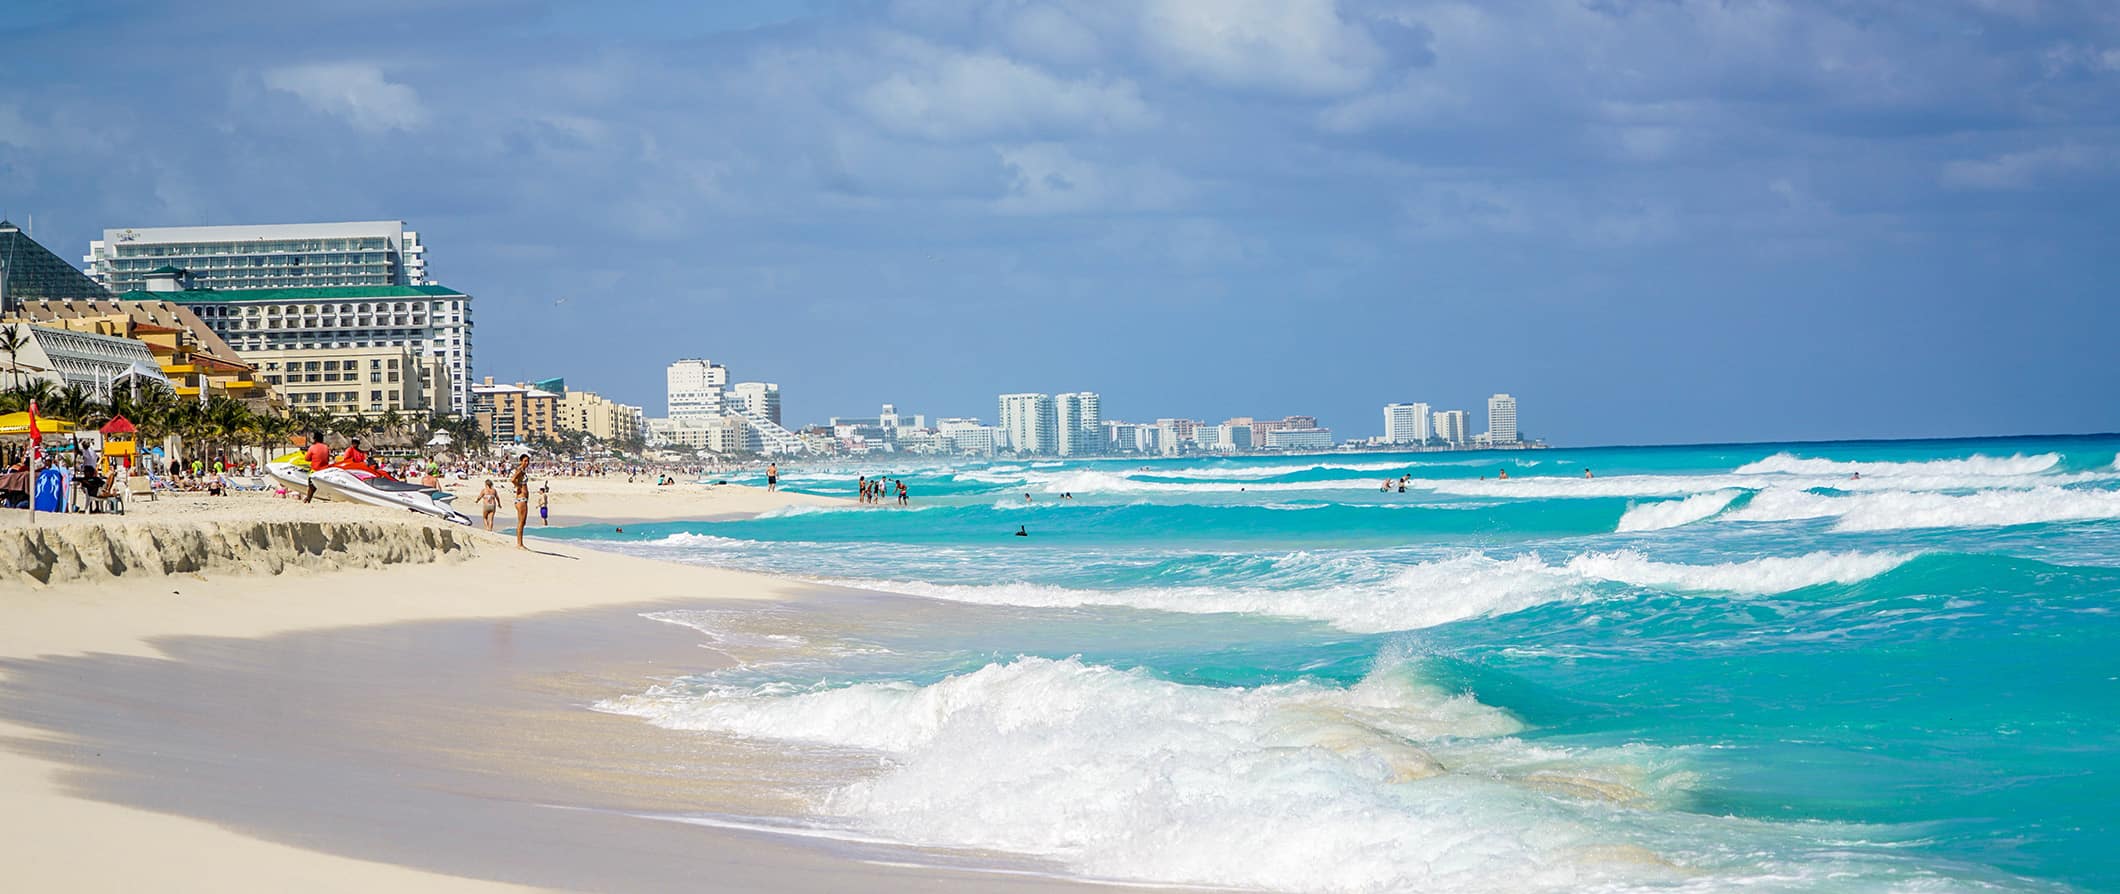 The beautiful beaches and coastline of Cancun, in sunny Mexico